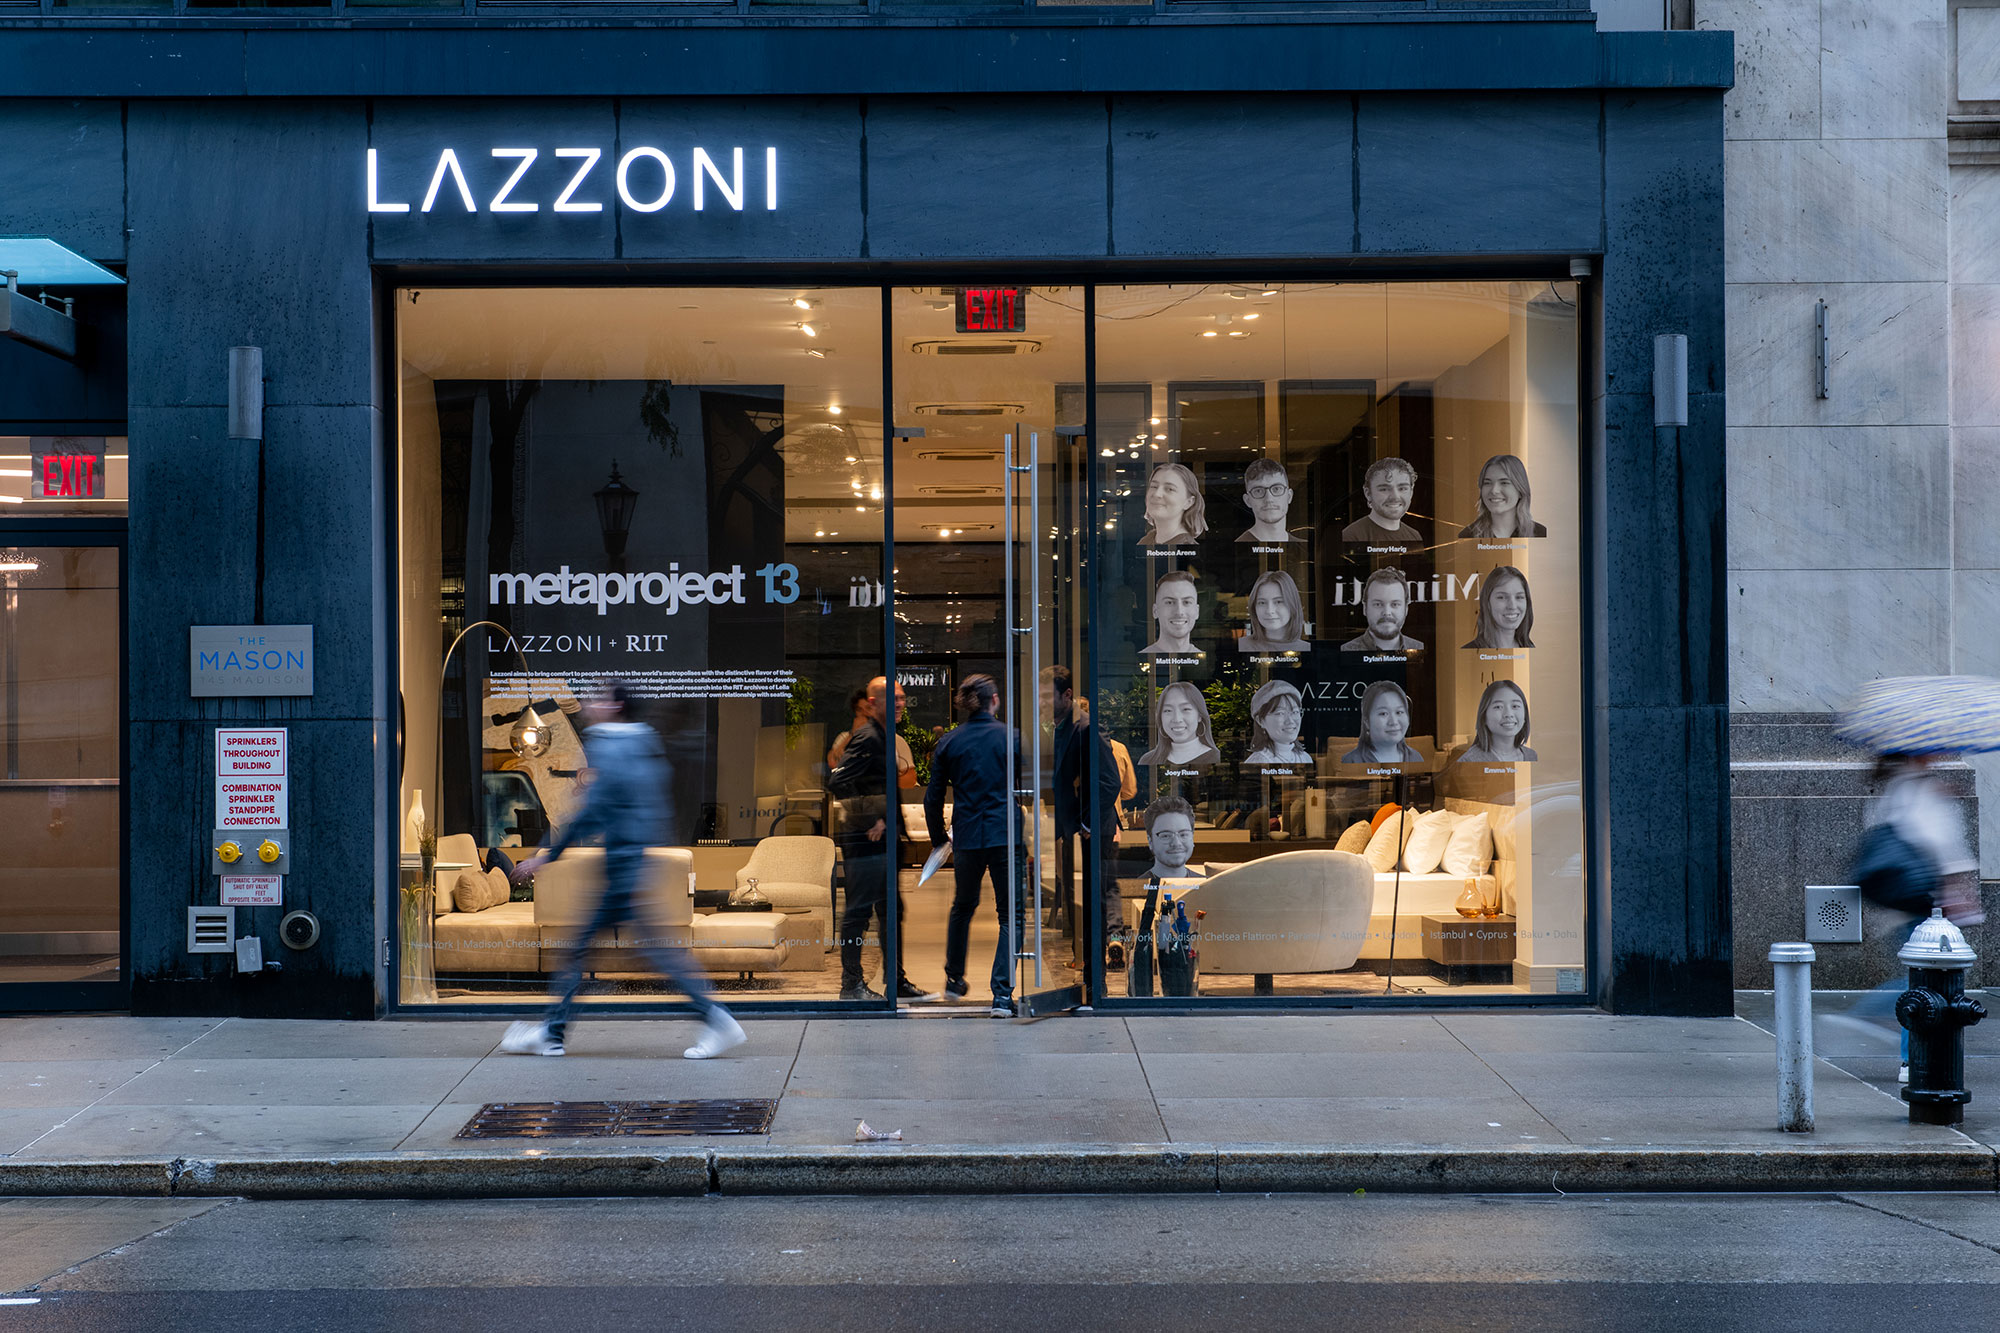 a store called Lazzoni with someone walking in front